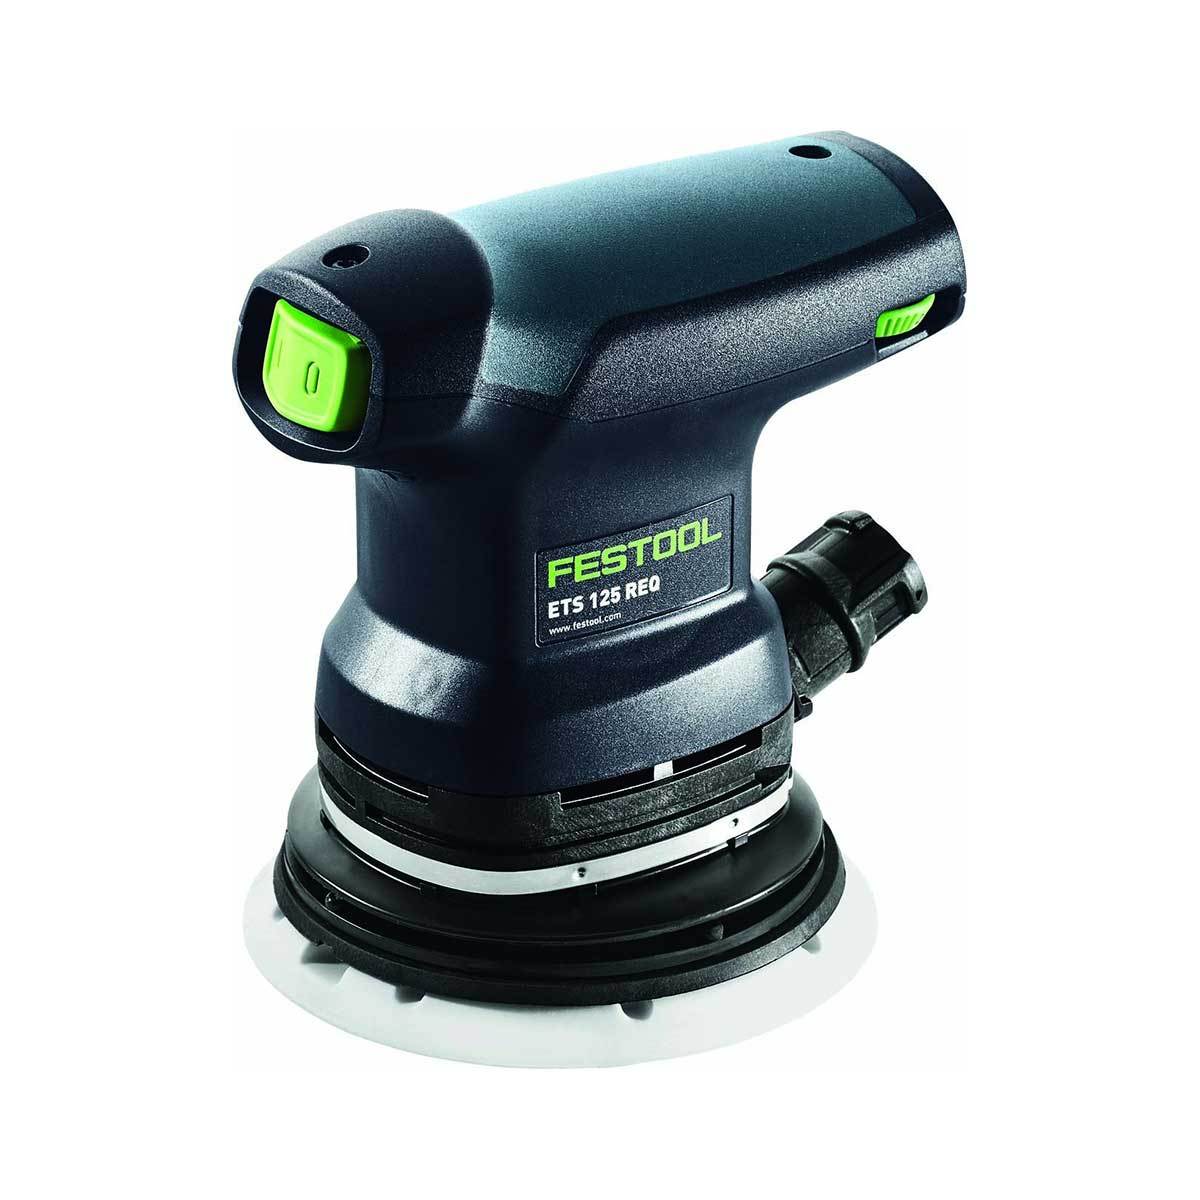 The Festool ETS 125 REQ random orbit sander is compact and lightweight, making it ideal for use on walls or ceilings.